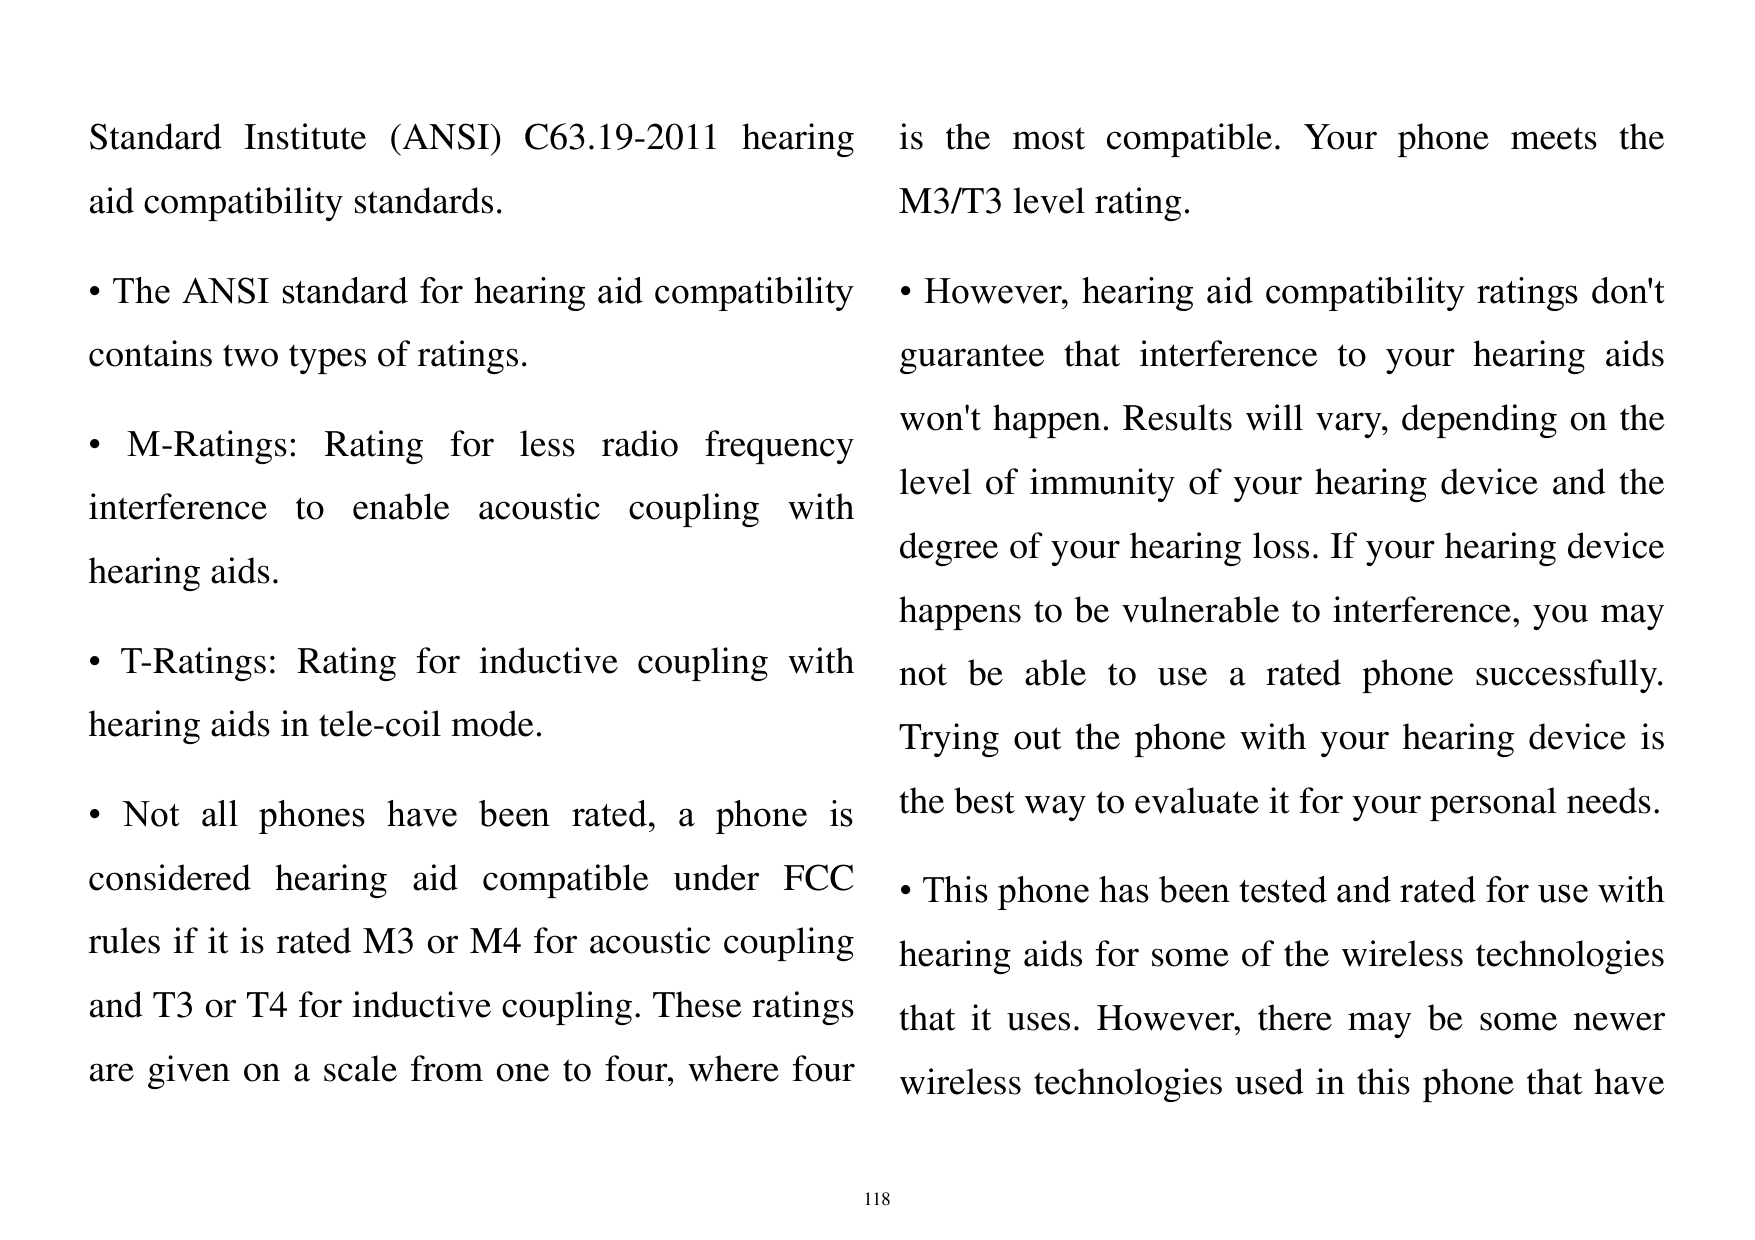 Standard Institute (ANSI) C63.19-2011 hearingis the most compatible. Your phone meets theaid compatibility standards.M3/T3 level